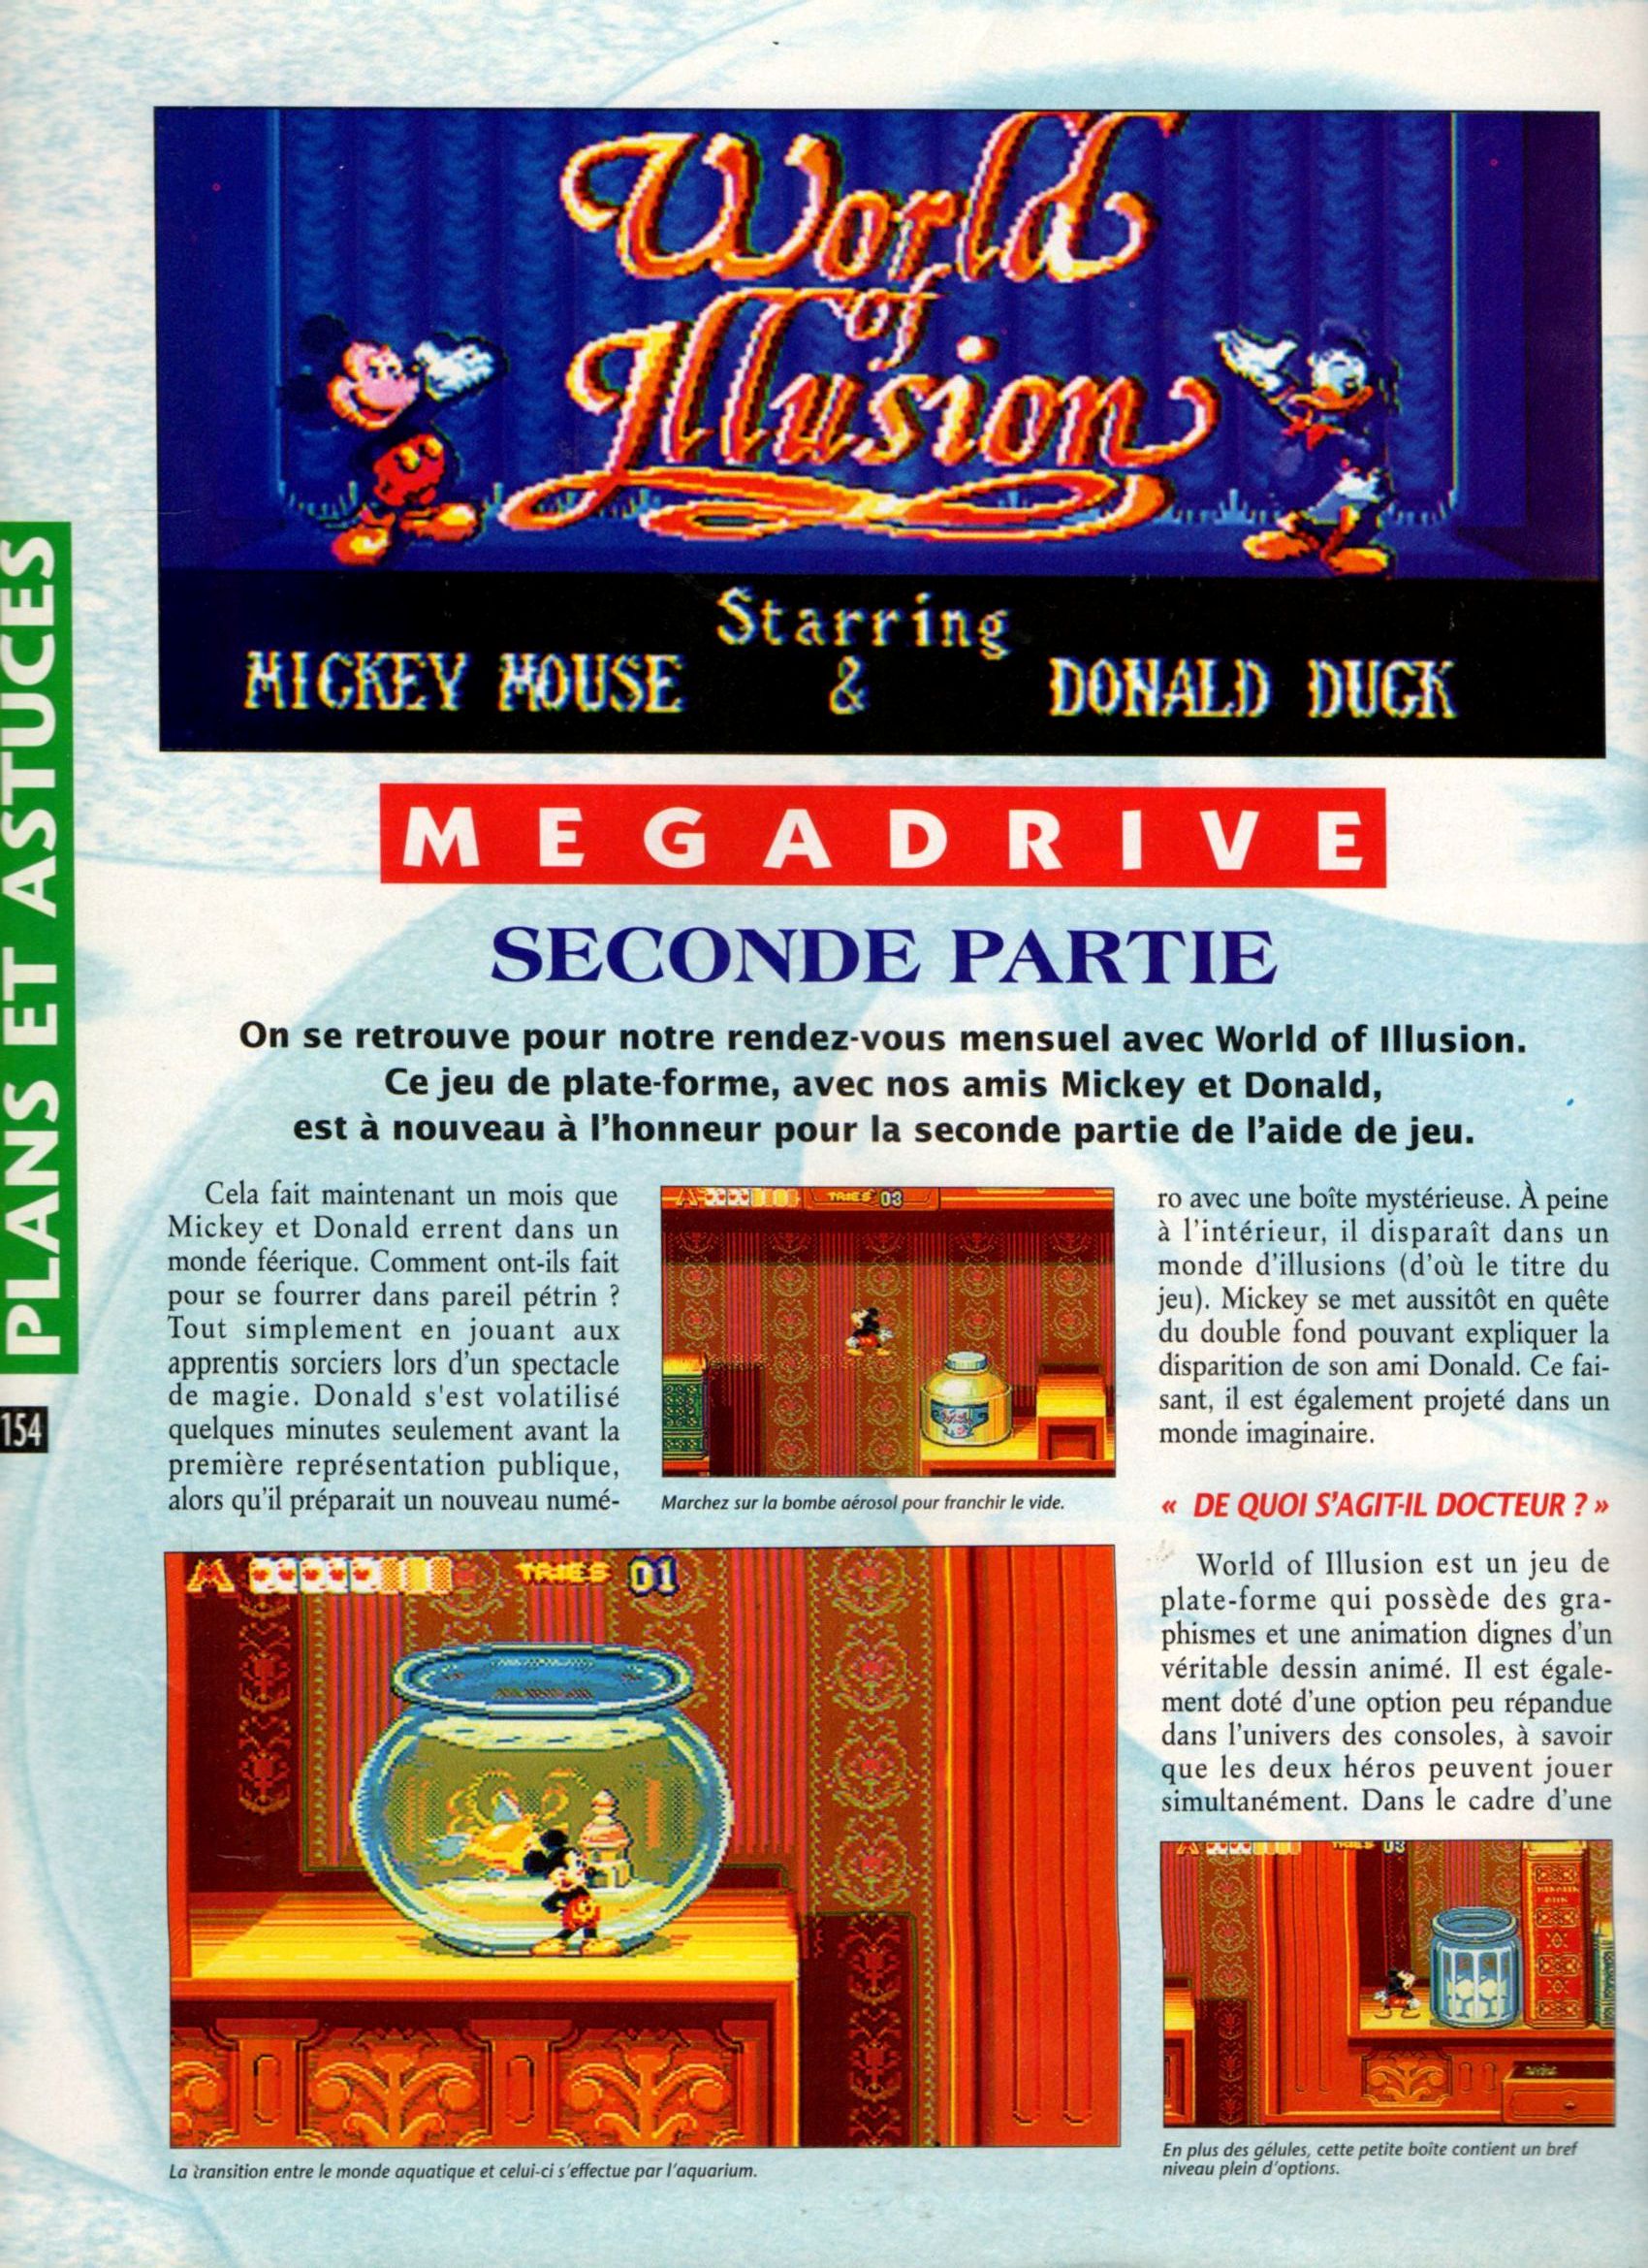 [TEST] World of Illusion (Mega Drive) Player%20One%20n%C2%B035%20%28Octobre%201993%29%20-%20Page%20154